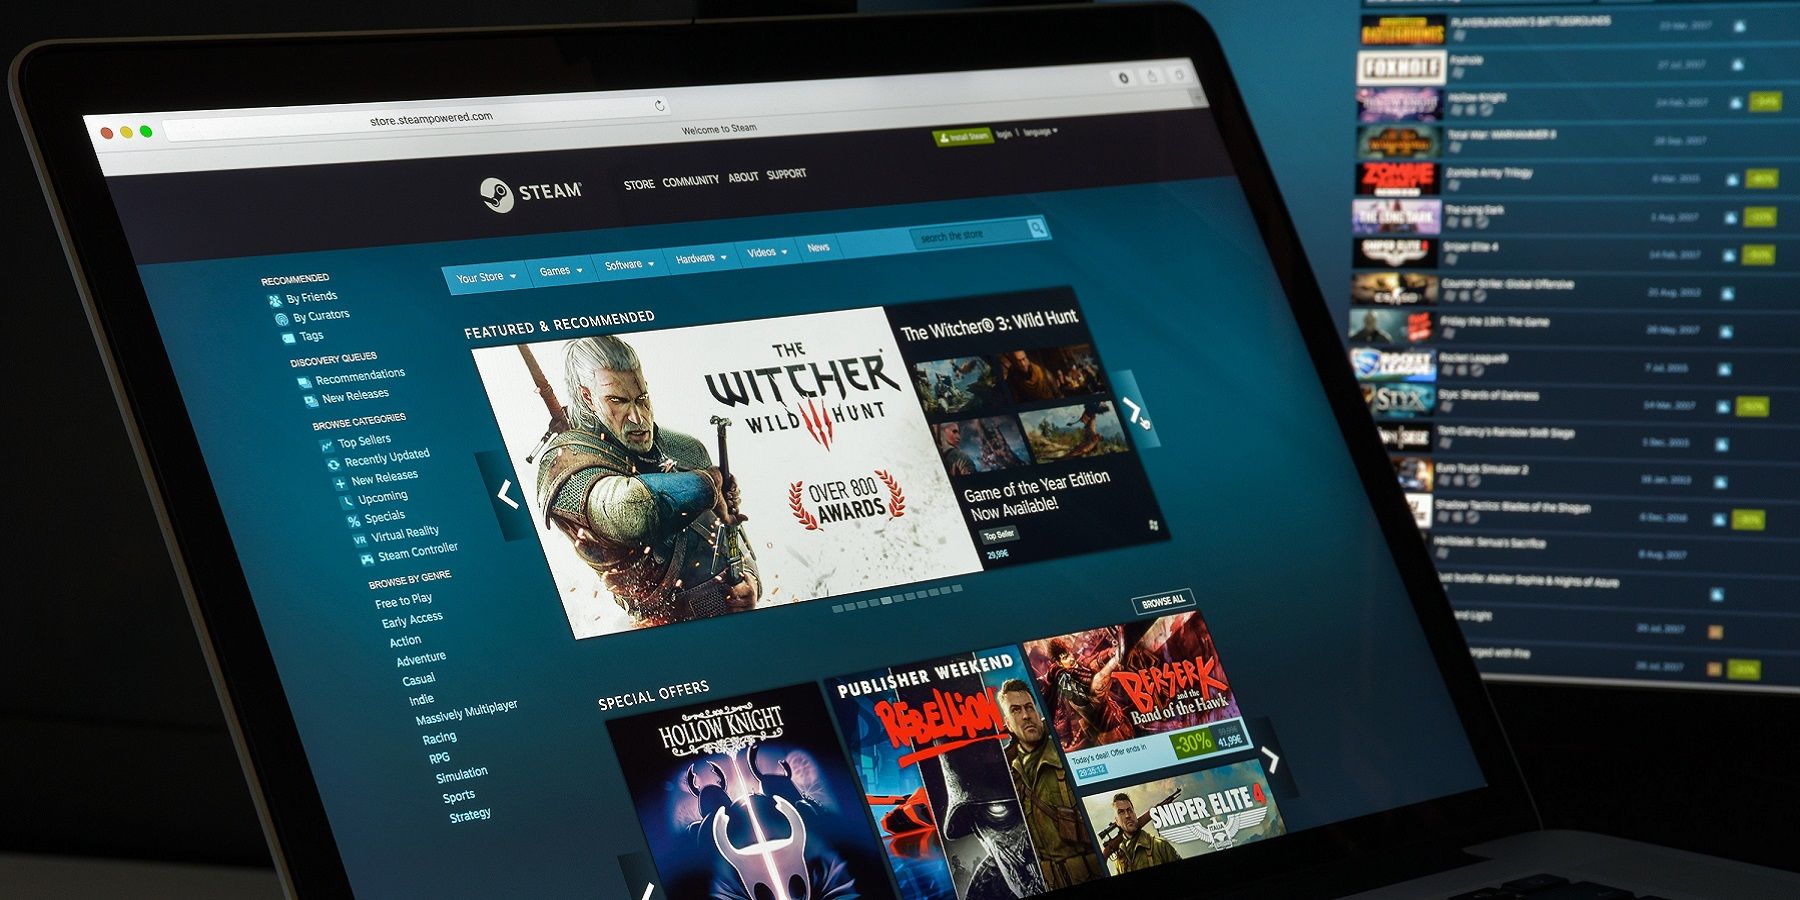 Photo of a laptop with the Steam client on the screen, with another monitor in the background also showing Steam.